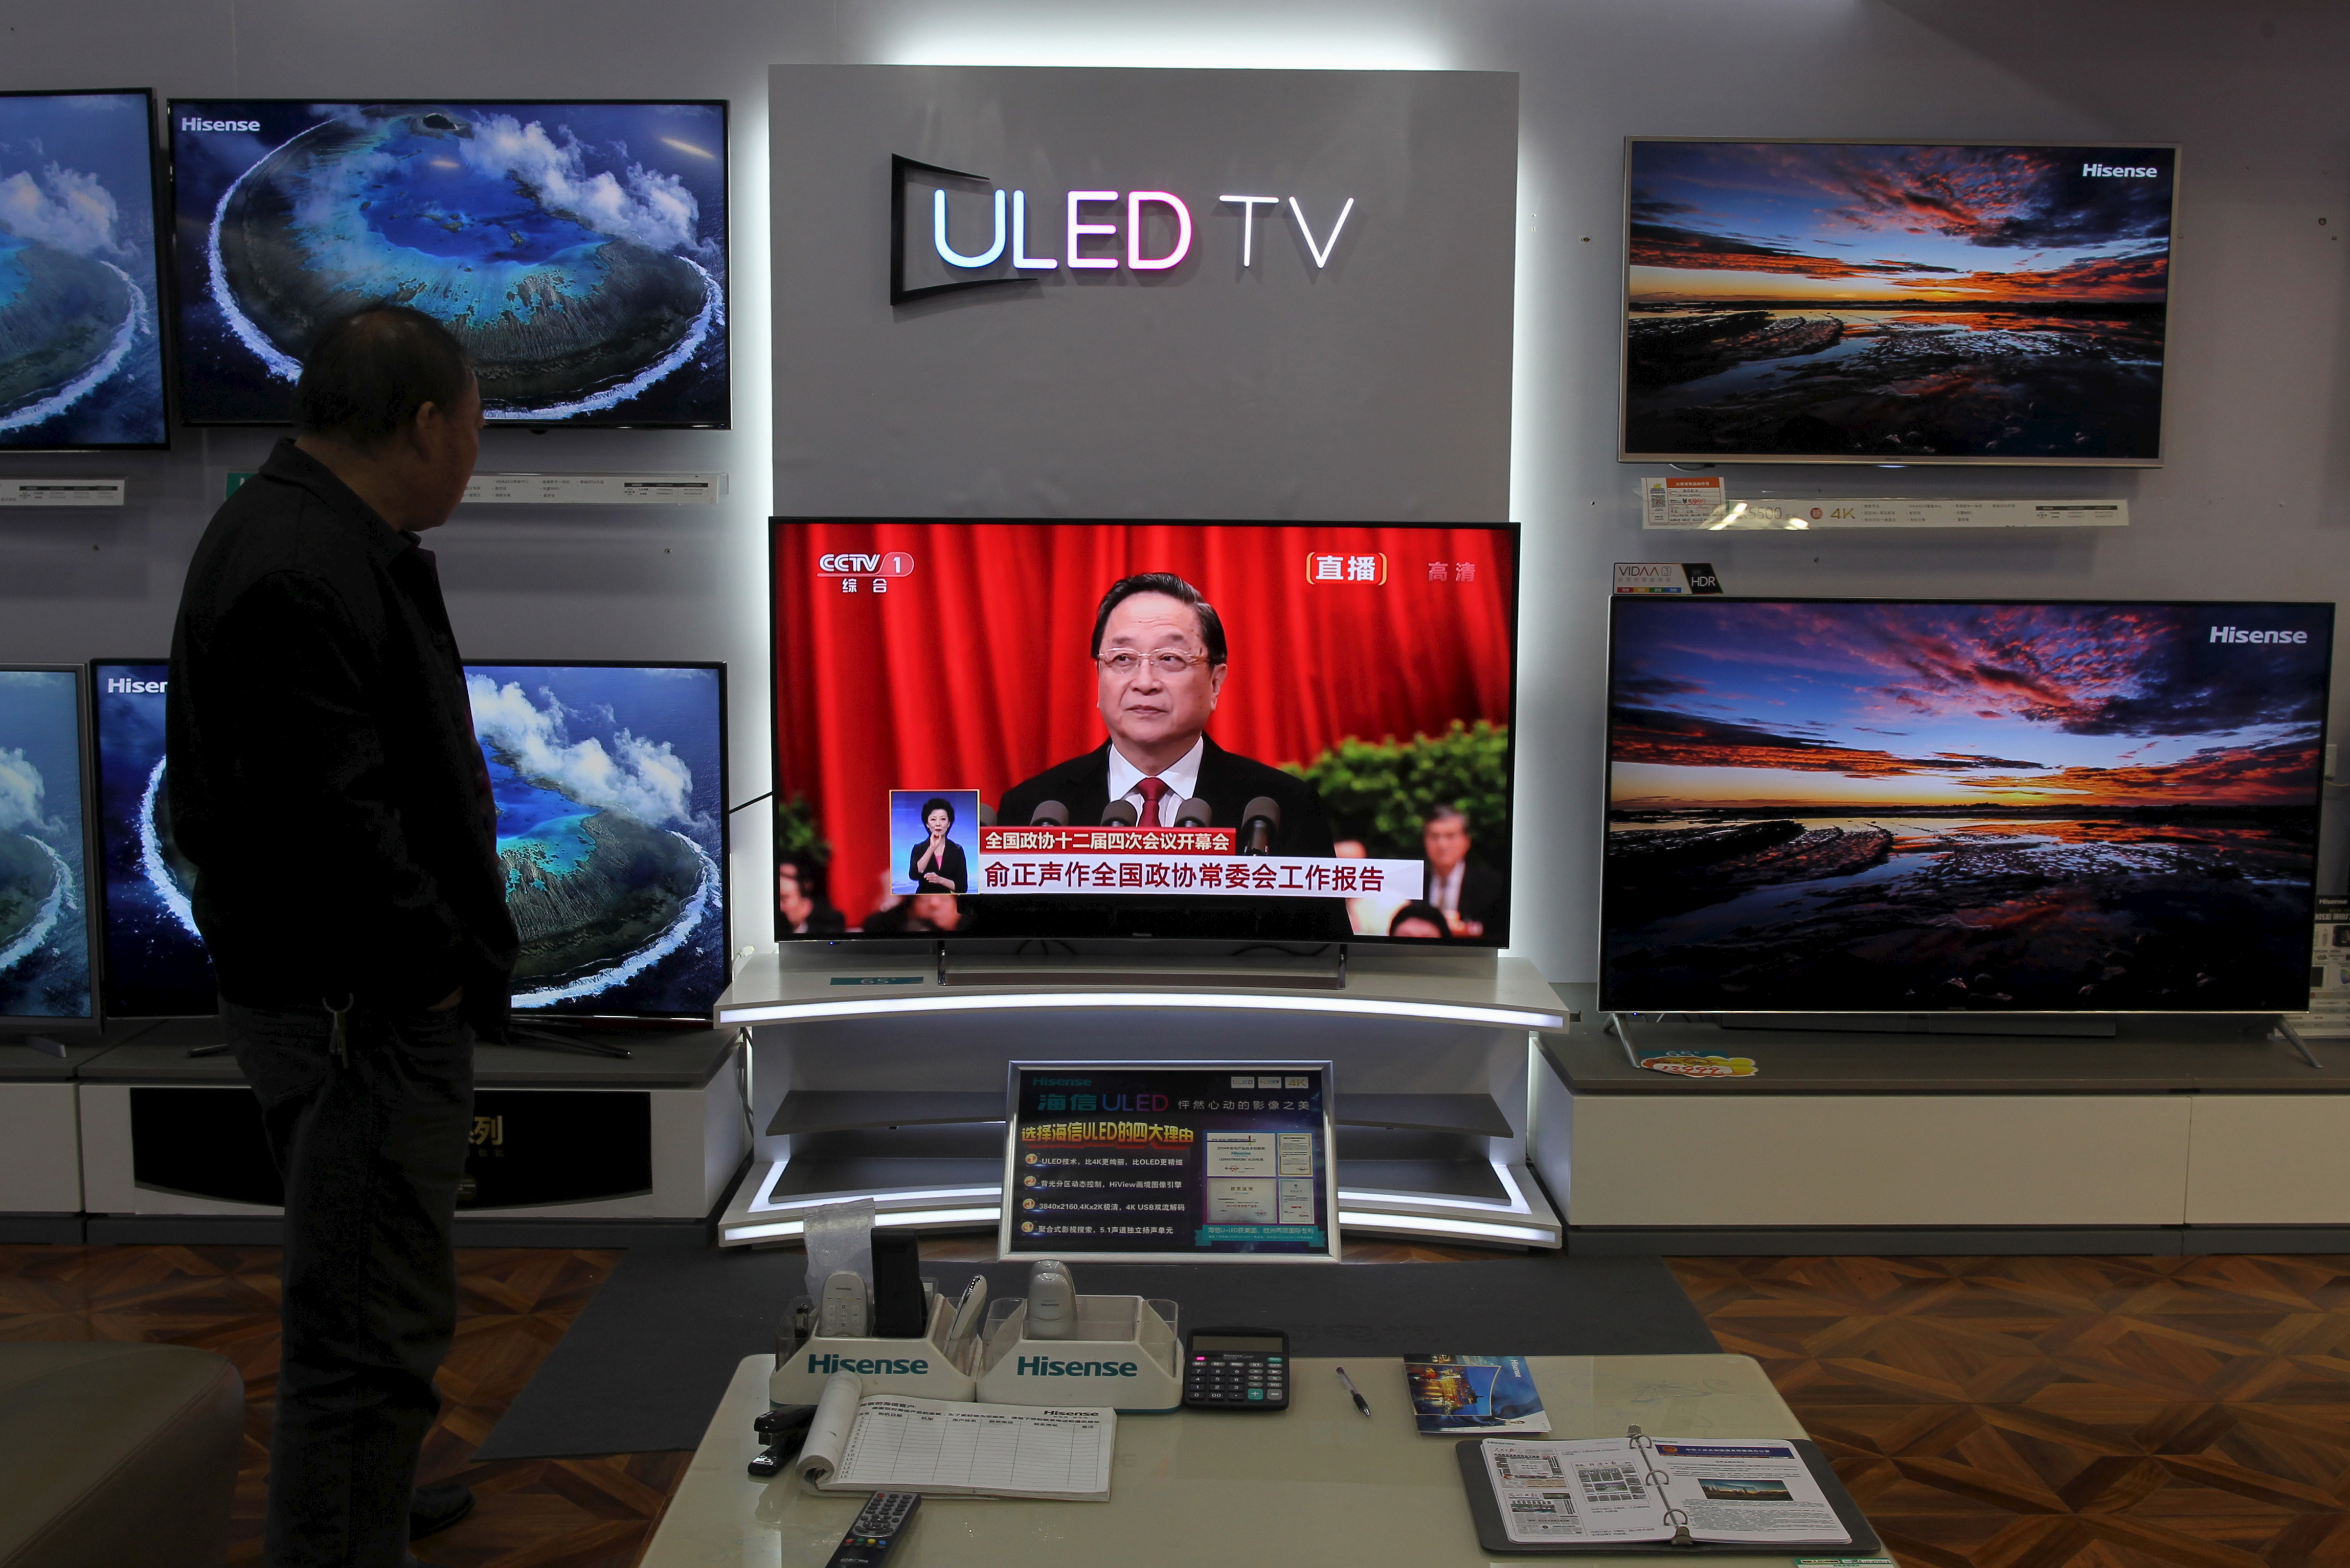 A man watches a TV screen showing live broadcast of Yu Zhengsheng, chairman of the National Committee of the Chinese People's Political Consultative Conference (CPPCC), giving a speech during the opening session of the CPPCC, at a shopping mall in Kunming, the Chinese province of Yunnan, on March 3, 2016 (Wong Campion—Reuters)